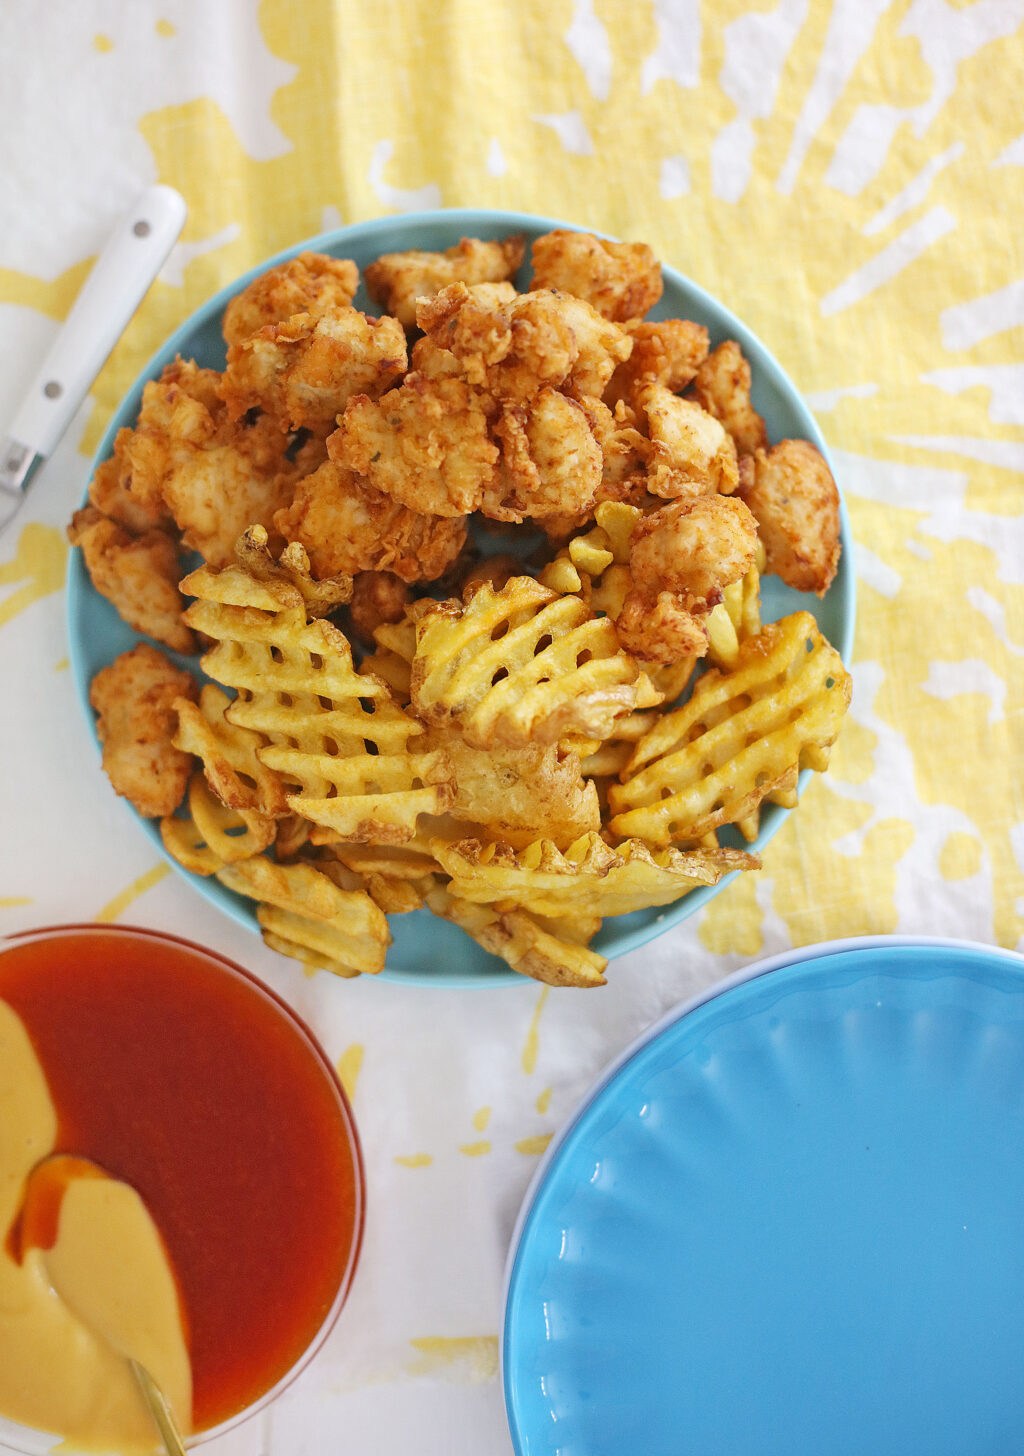 homemade chick-fil-a nuggets on a blue plate with a side of waffle fries